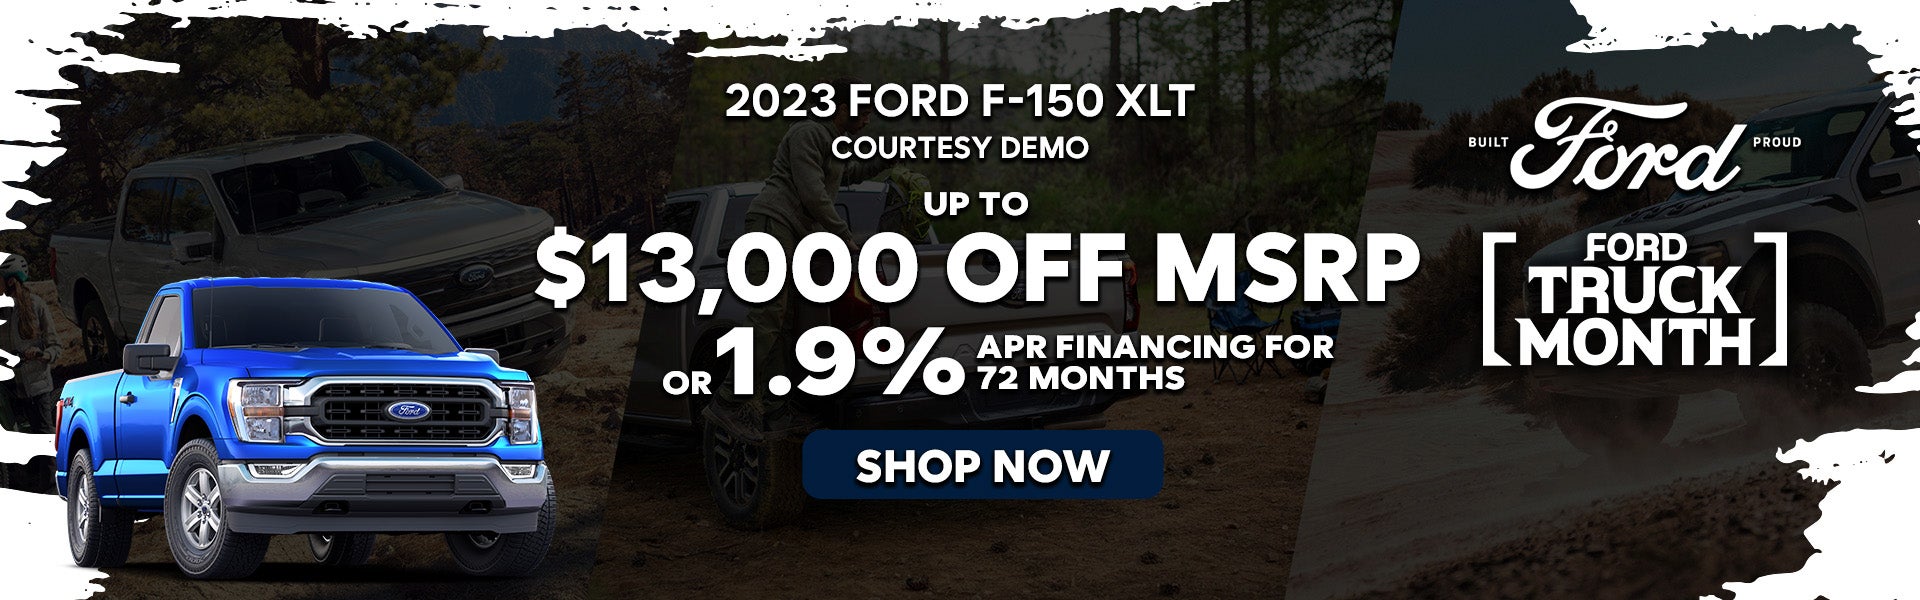 2023 Ford F-150 XLT Courtesy Vehicle Special Offer